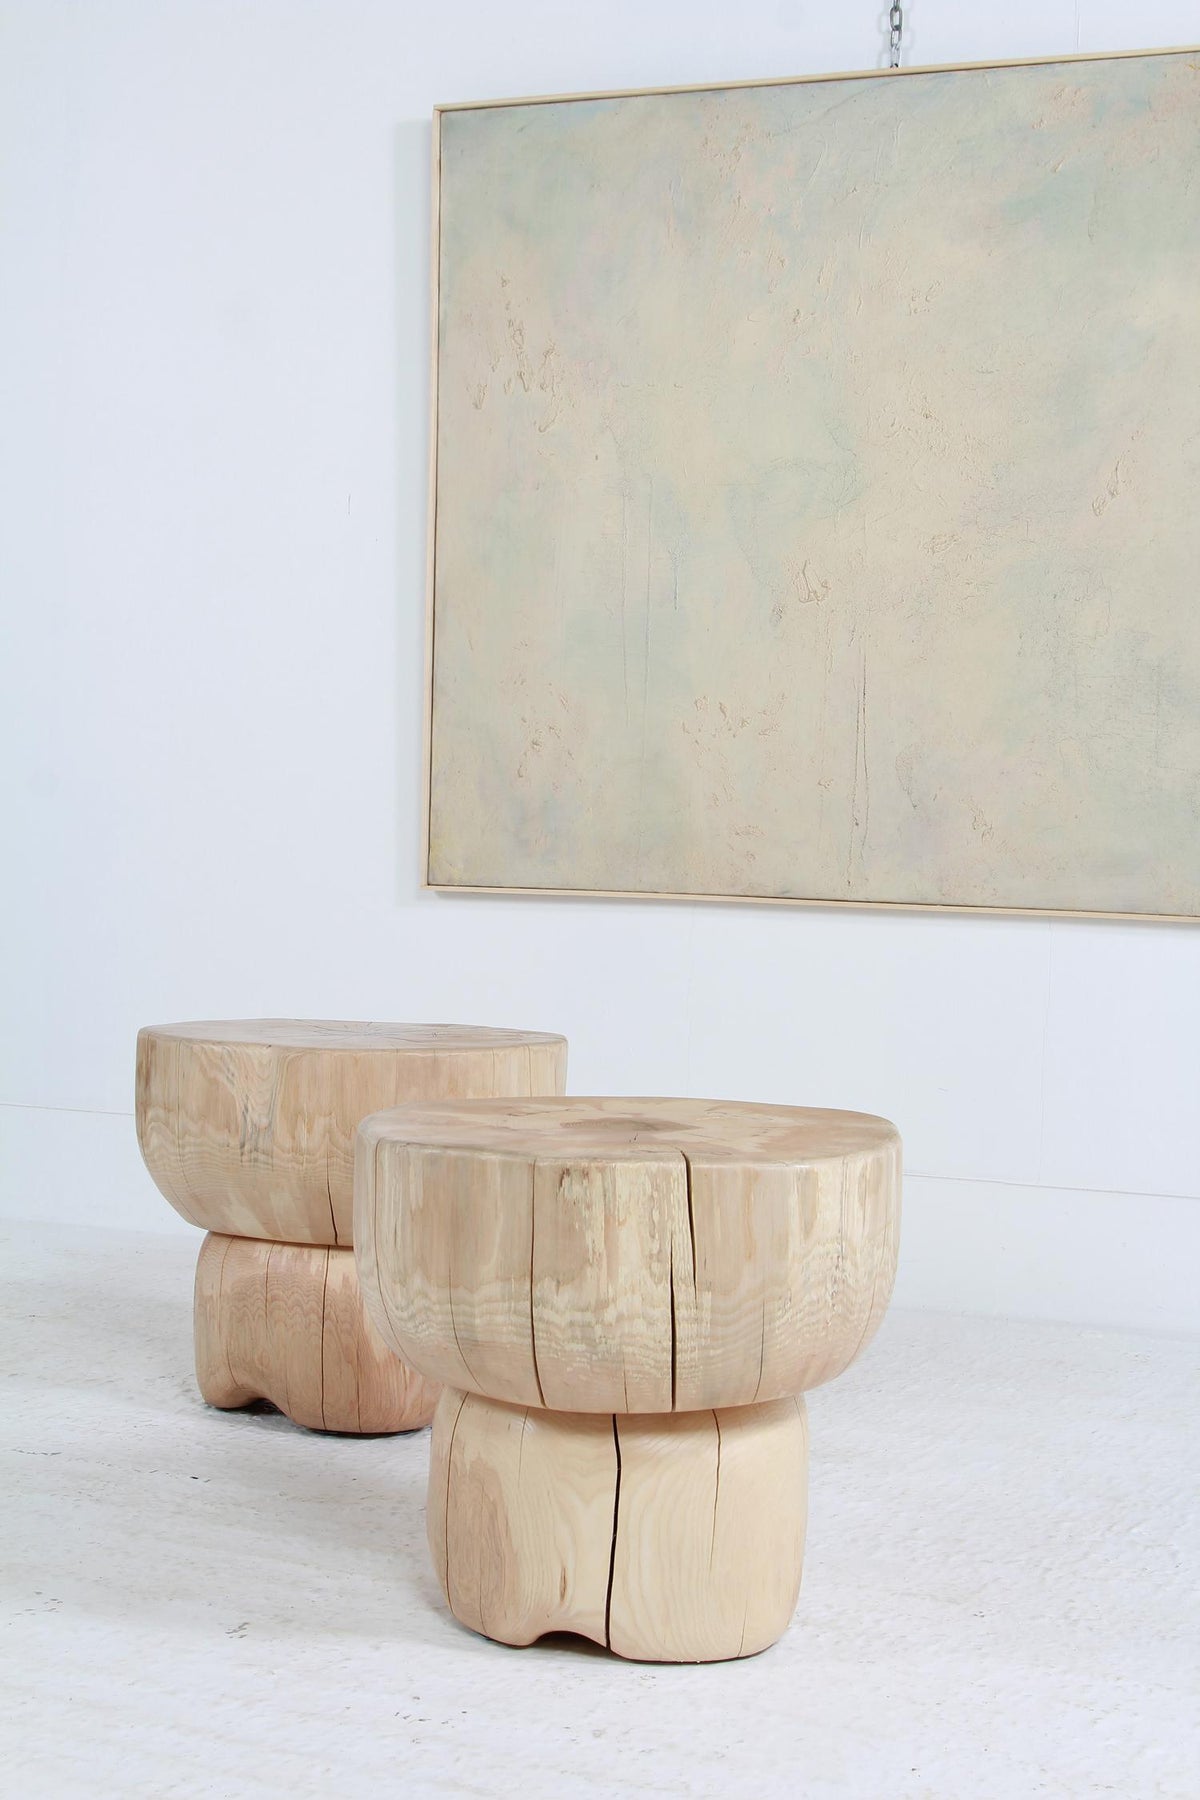 BEAUTIFULLY SCULPTURED ARTISAN  ASH COFFEE TABLES.PLEASE ENQUIRE